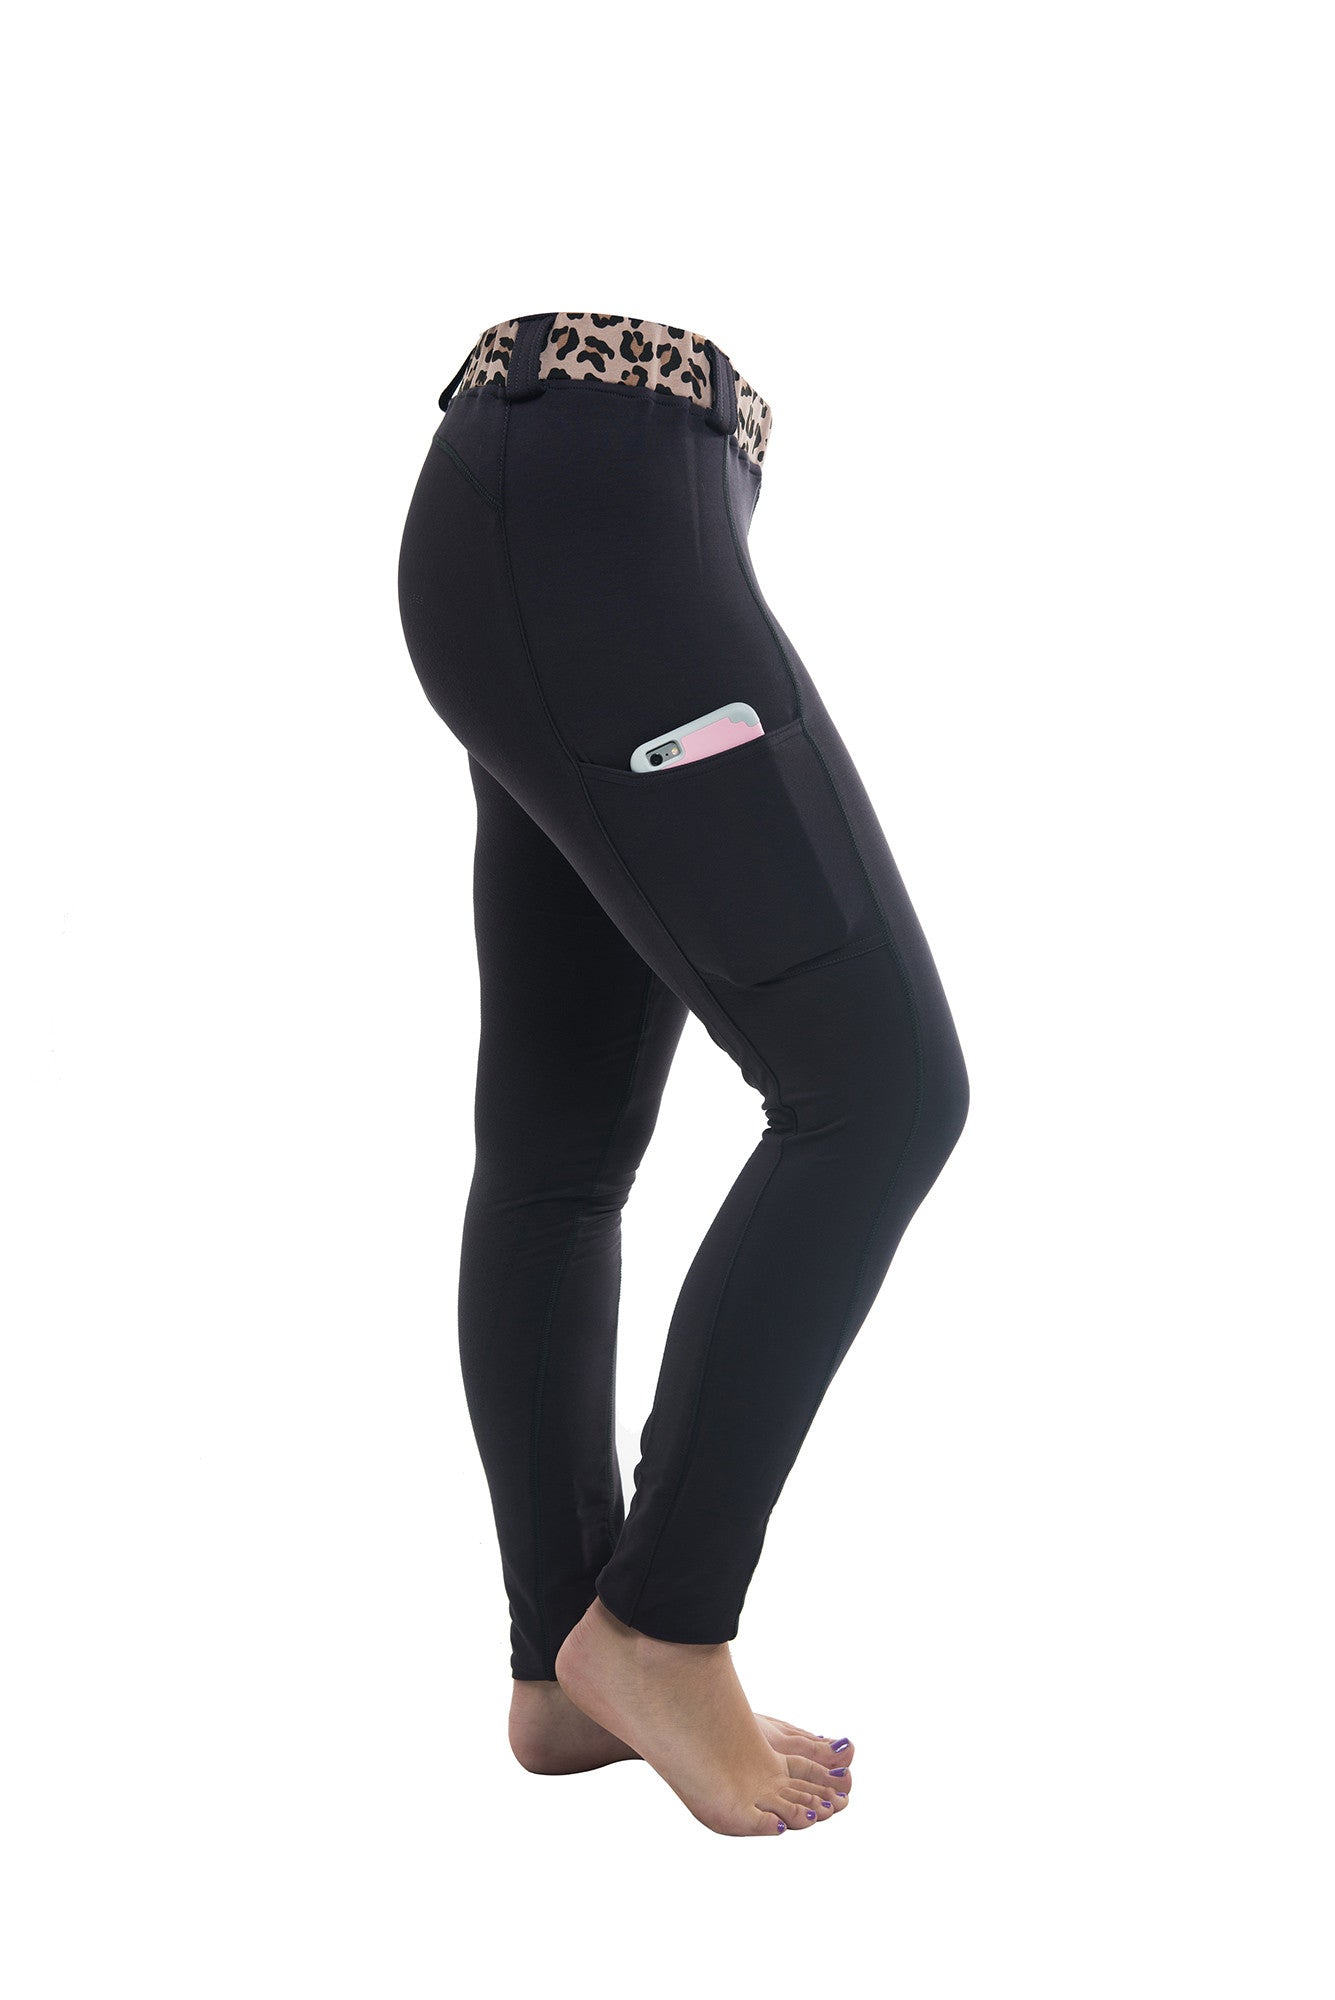 Buckwild Horse Riding Tights with Side Pocket for Technology